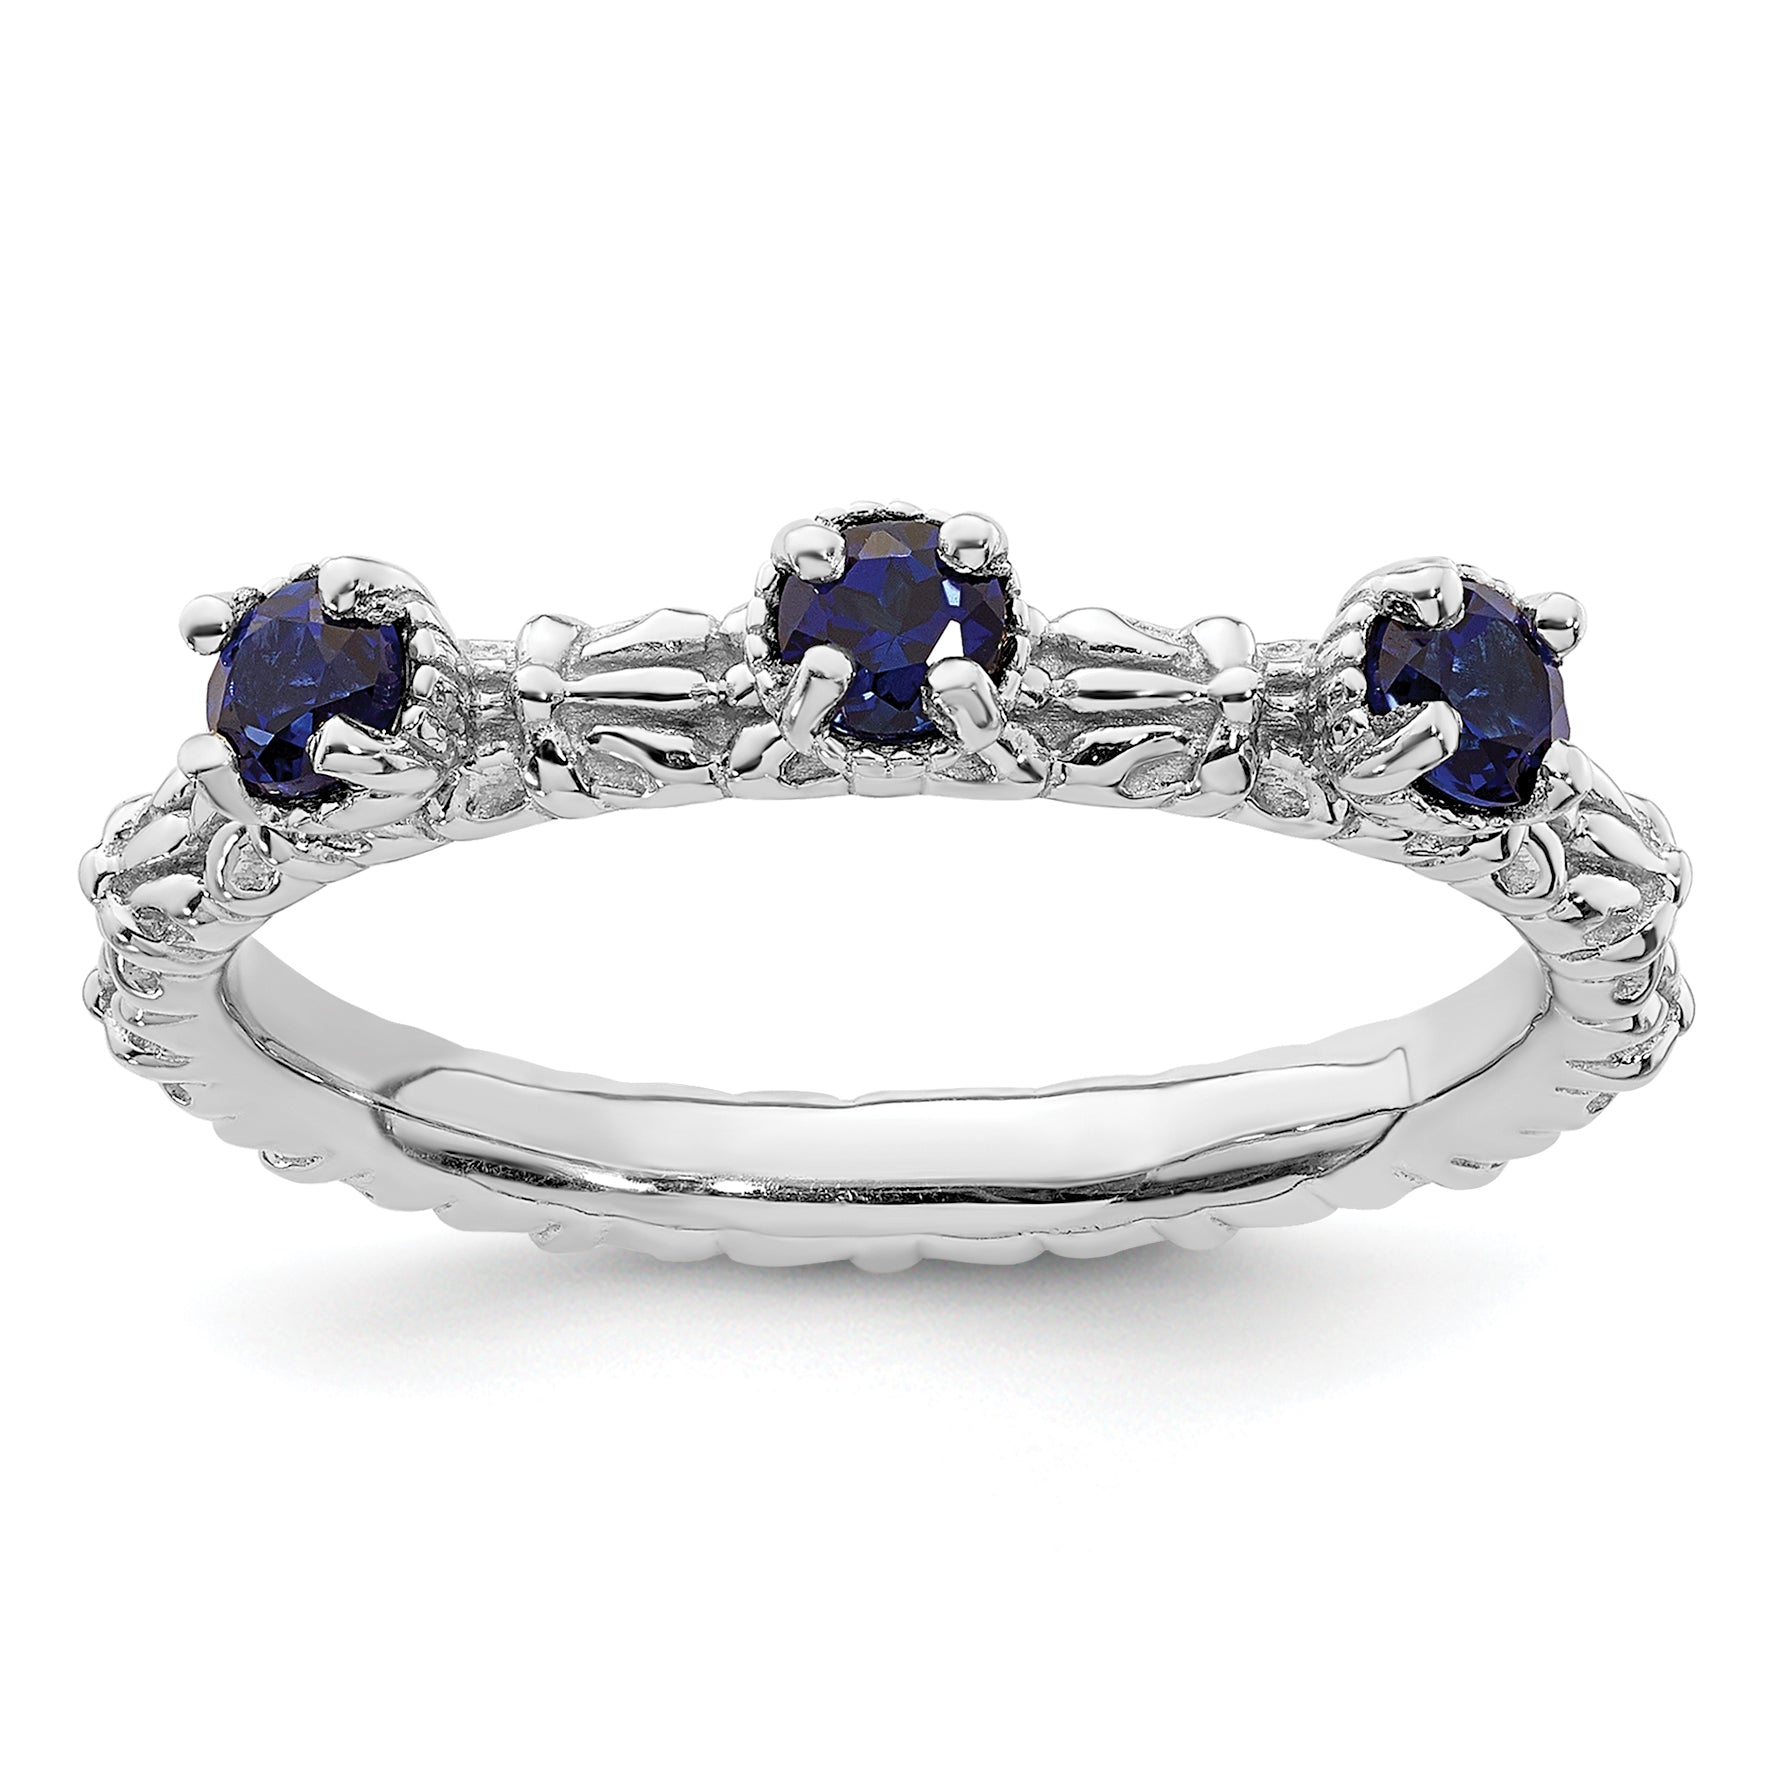 Sterling Silver Stackable Expressions Created Sapphire Three Stone Ring